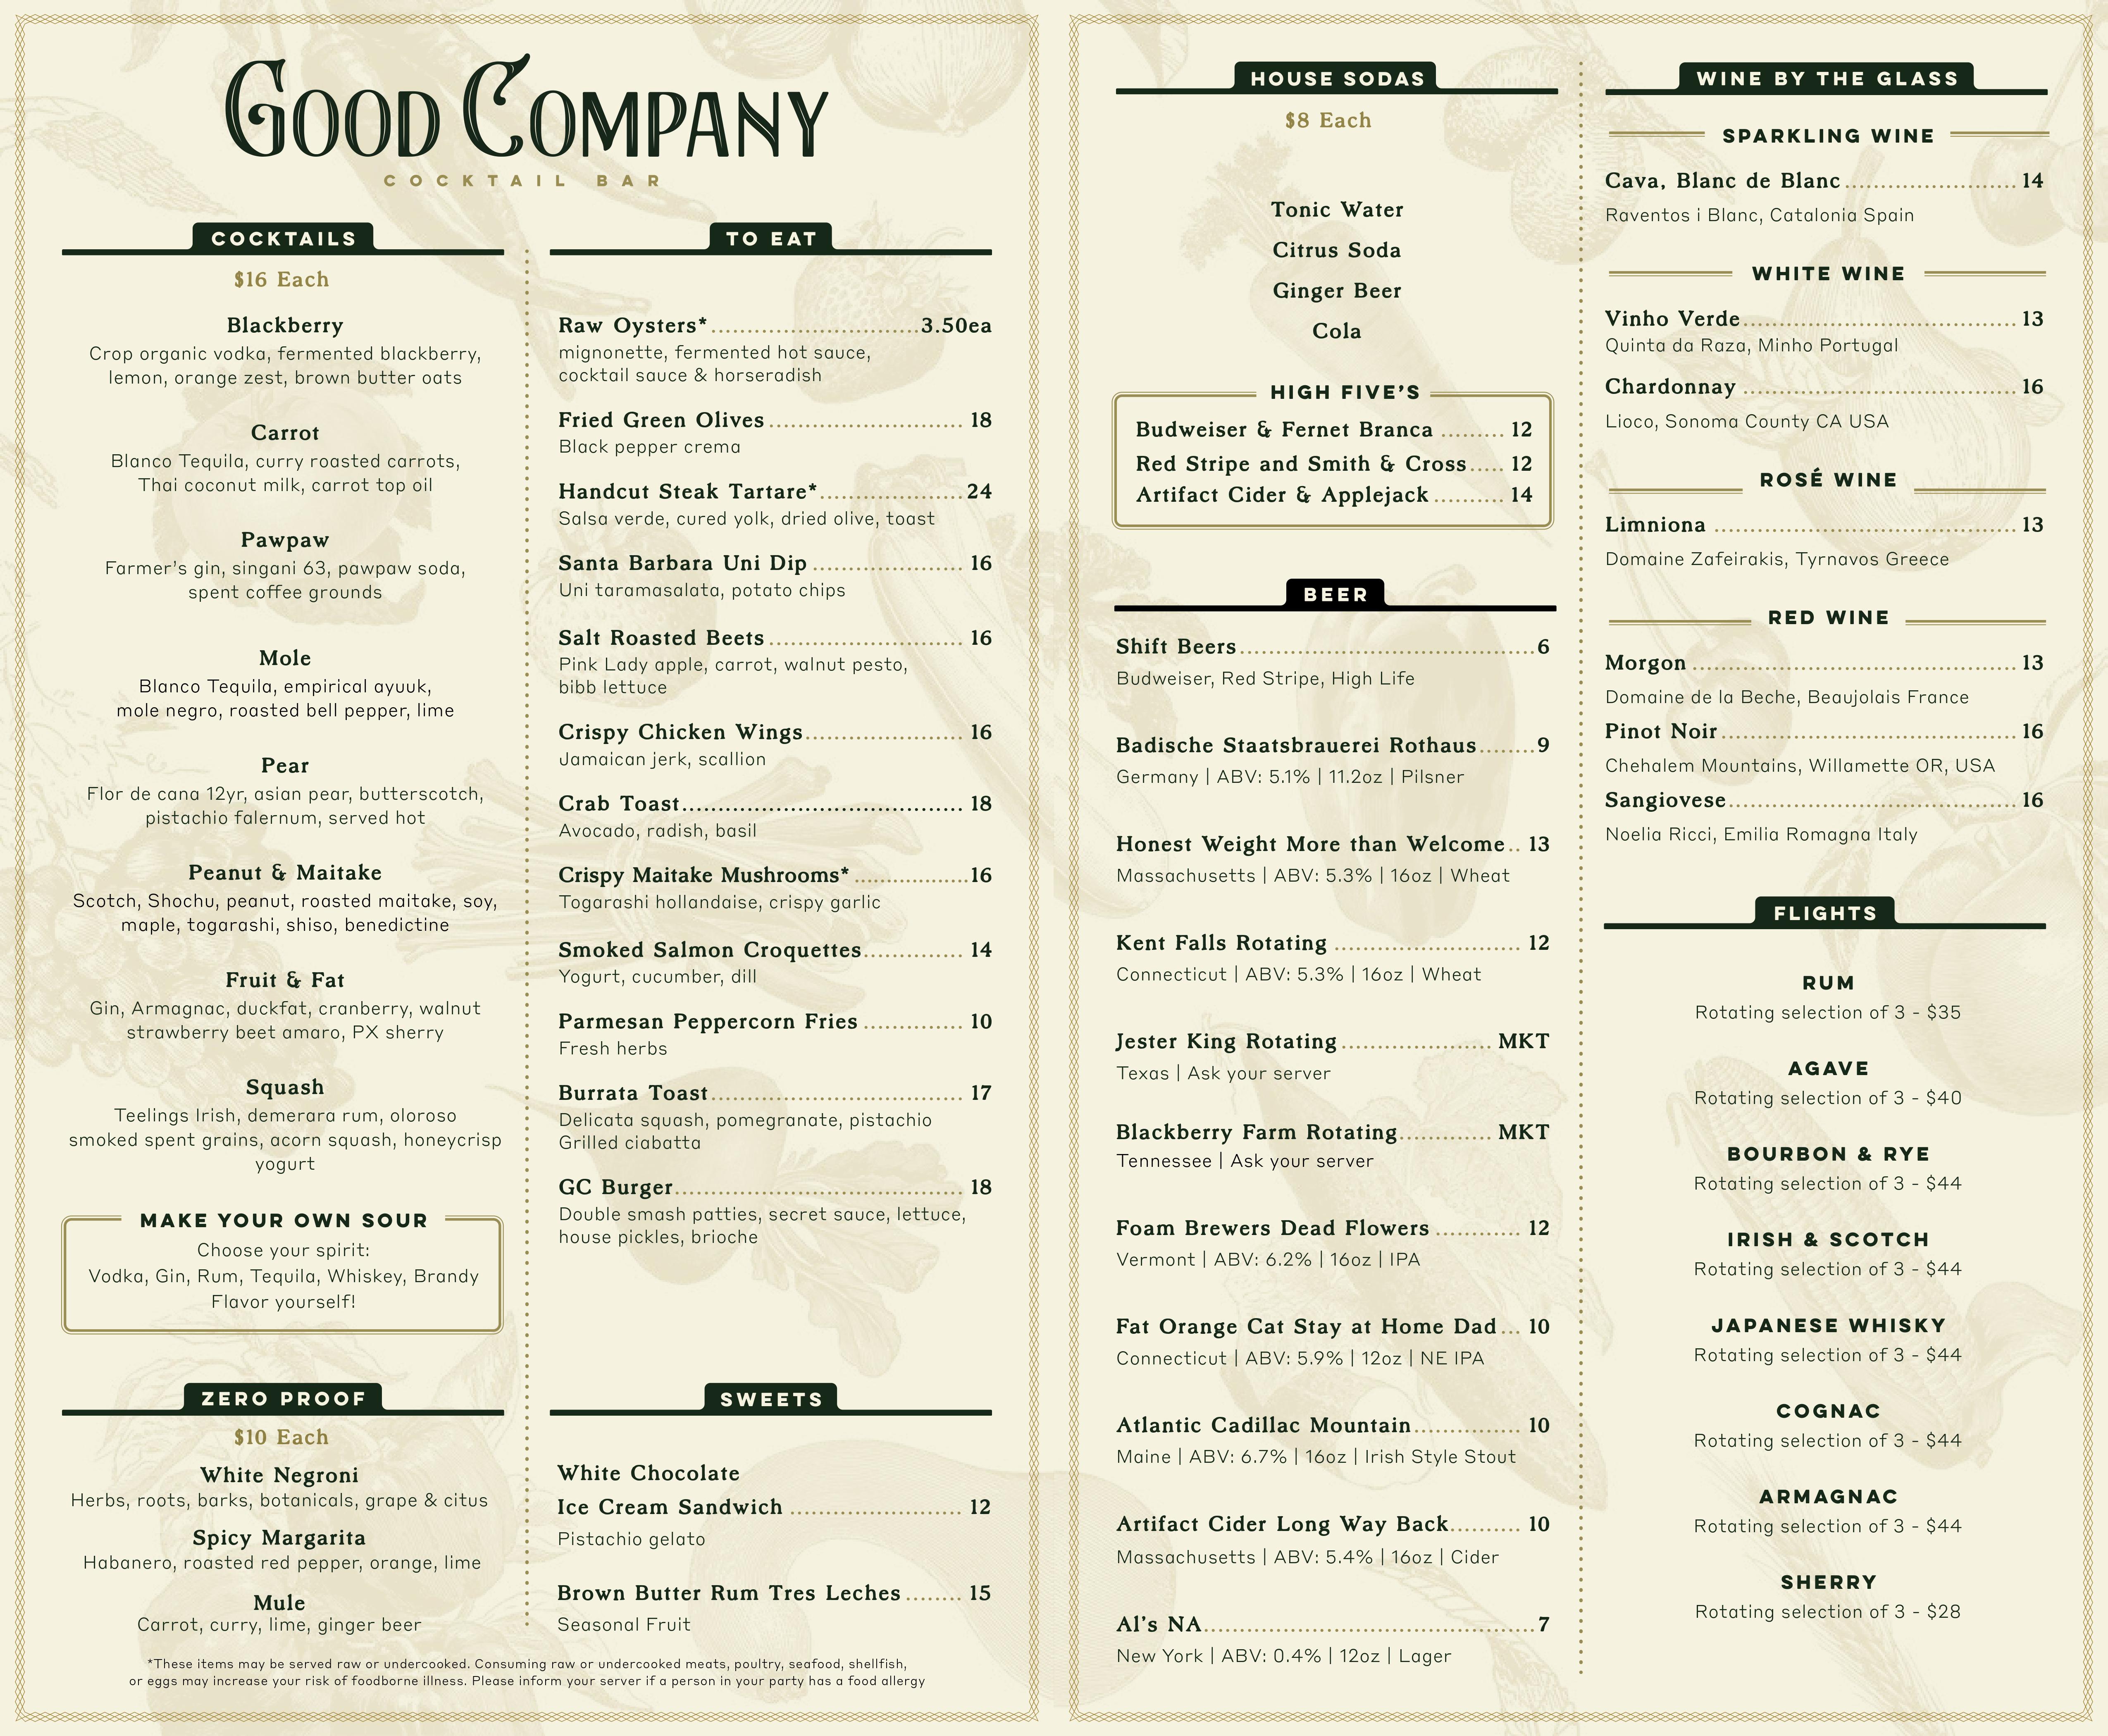 Food and drink menu for a bar called Good Company.